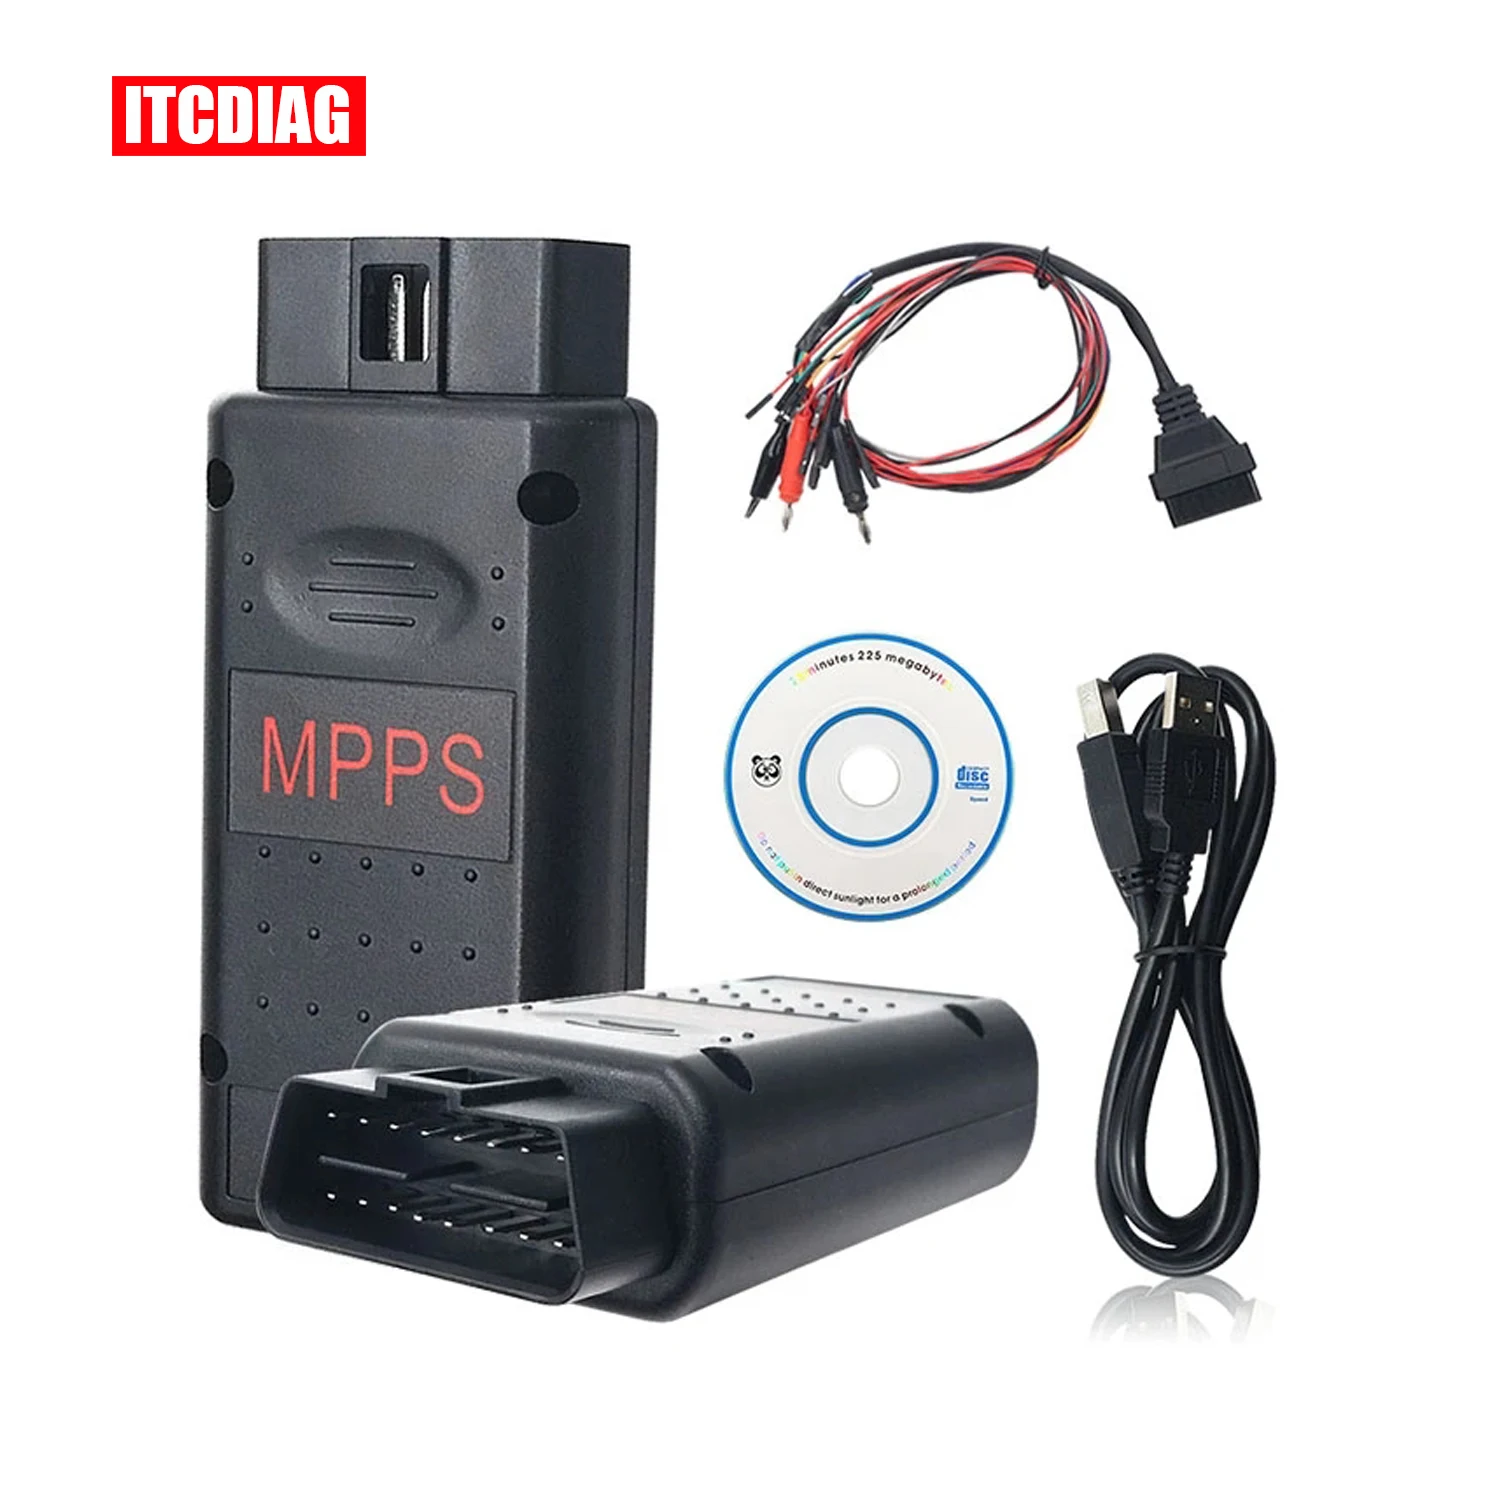 

MPPS V16 V18 V21 ECU Chip Tuning Tool MAIN+TRICORE+MULTIBOOT with Breakout Tricore Cable ECU Flasher For EDC15 EDC16 EDC17 INKL